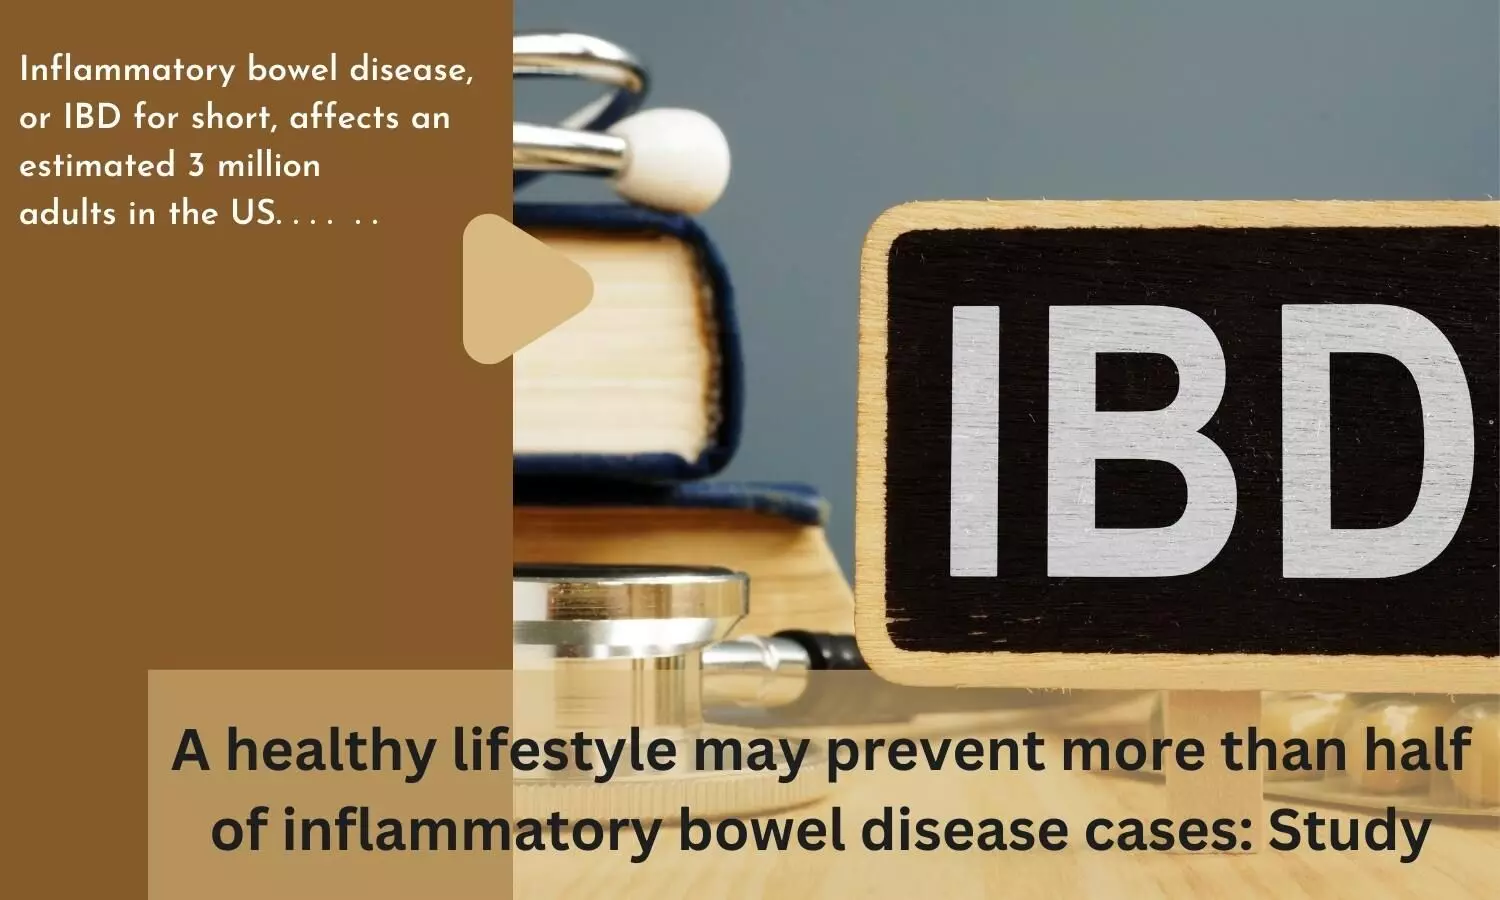 A healthy lifestyle may prevent more than half of inflammatory bowel disease cases: Study